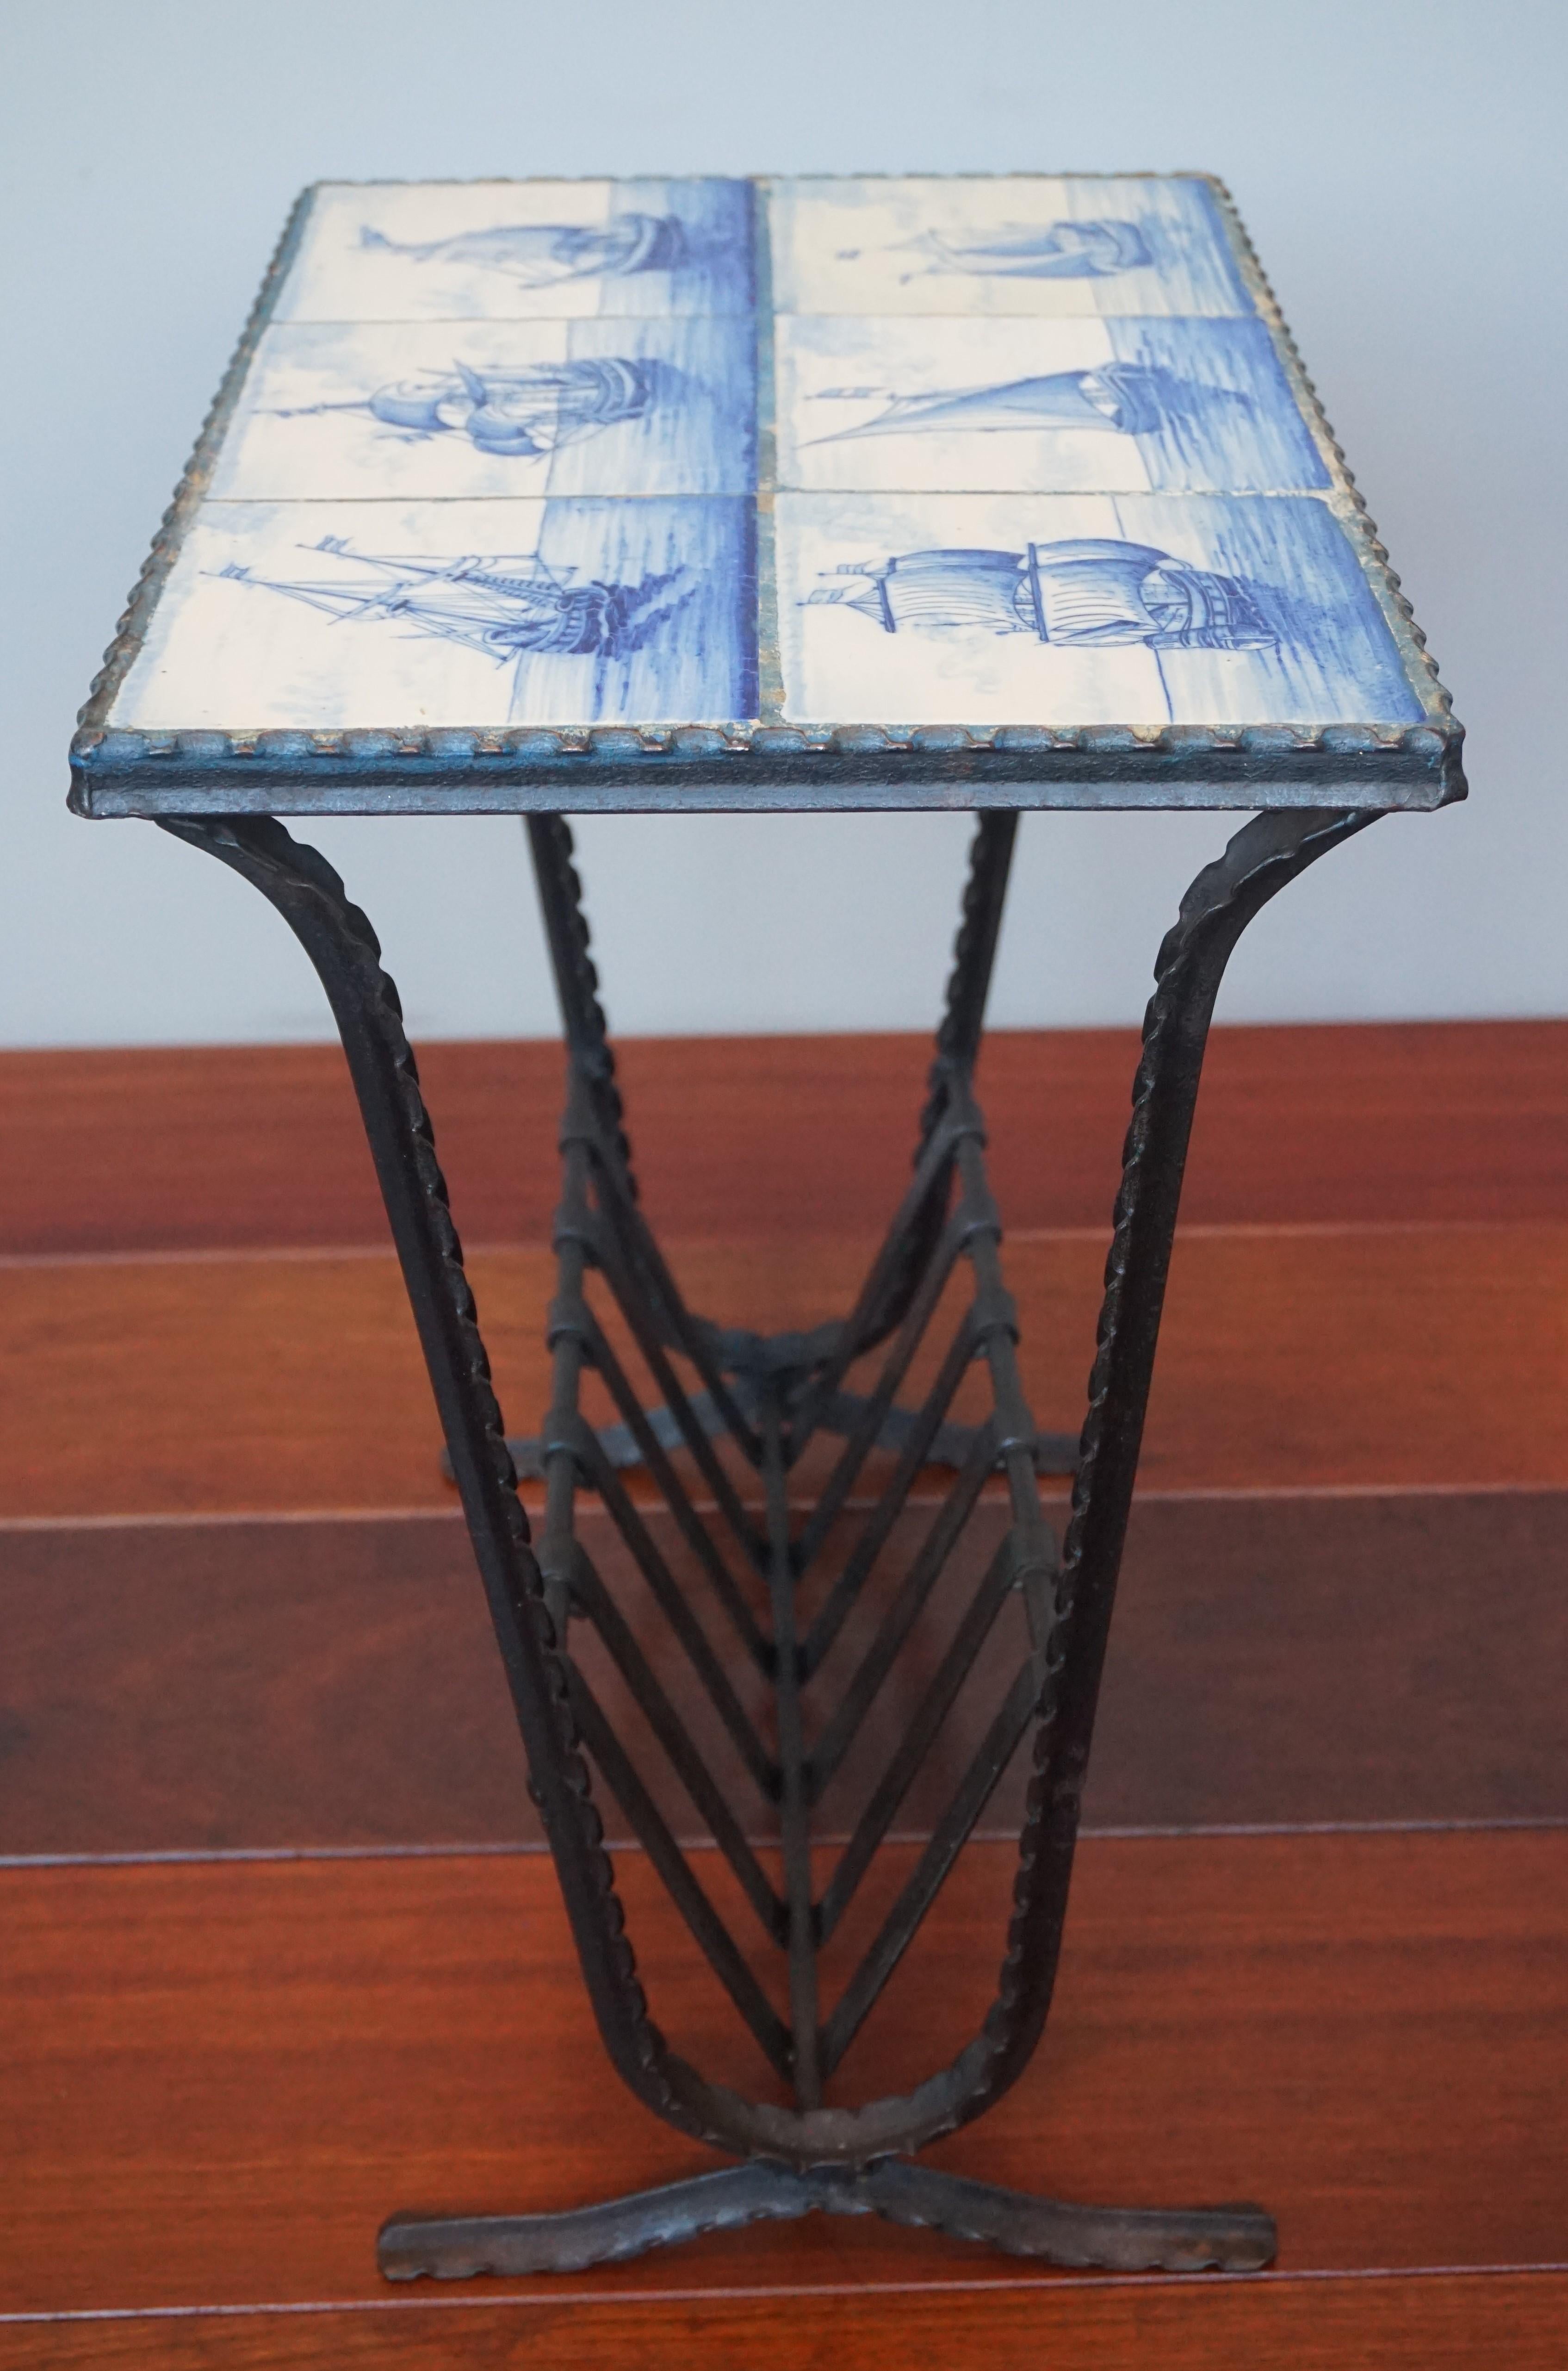 Arts and Crafts Early 1900s Wrought Iron & Delftware Tiles Table with Hand Painted Ancient Ships